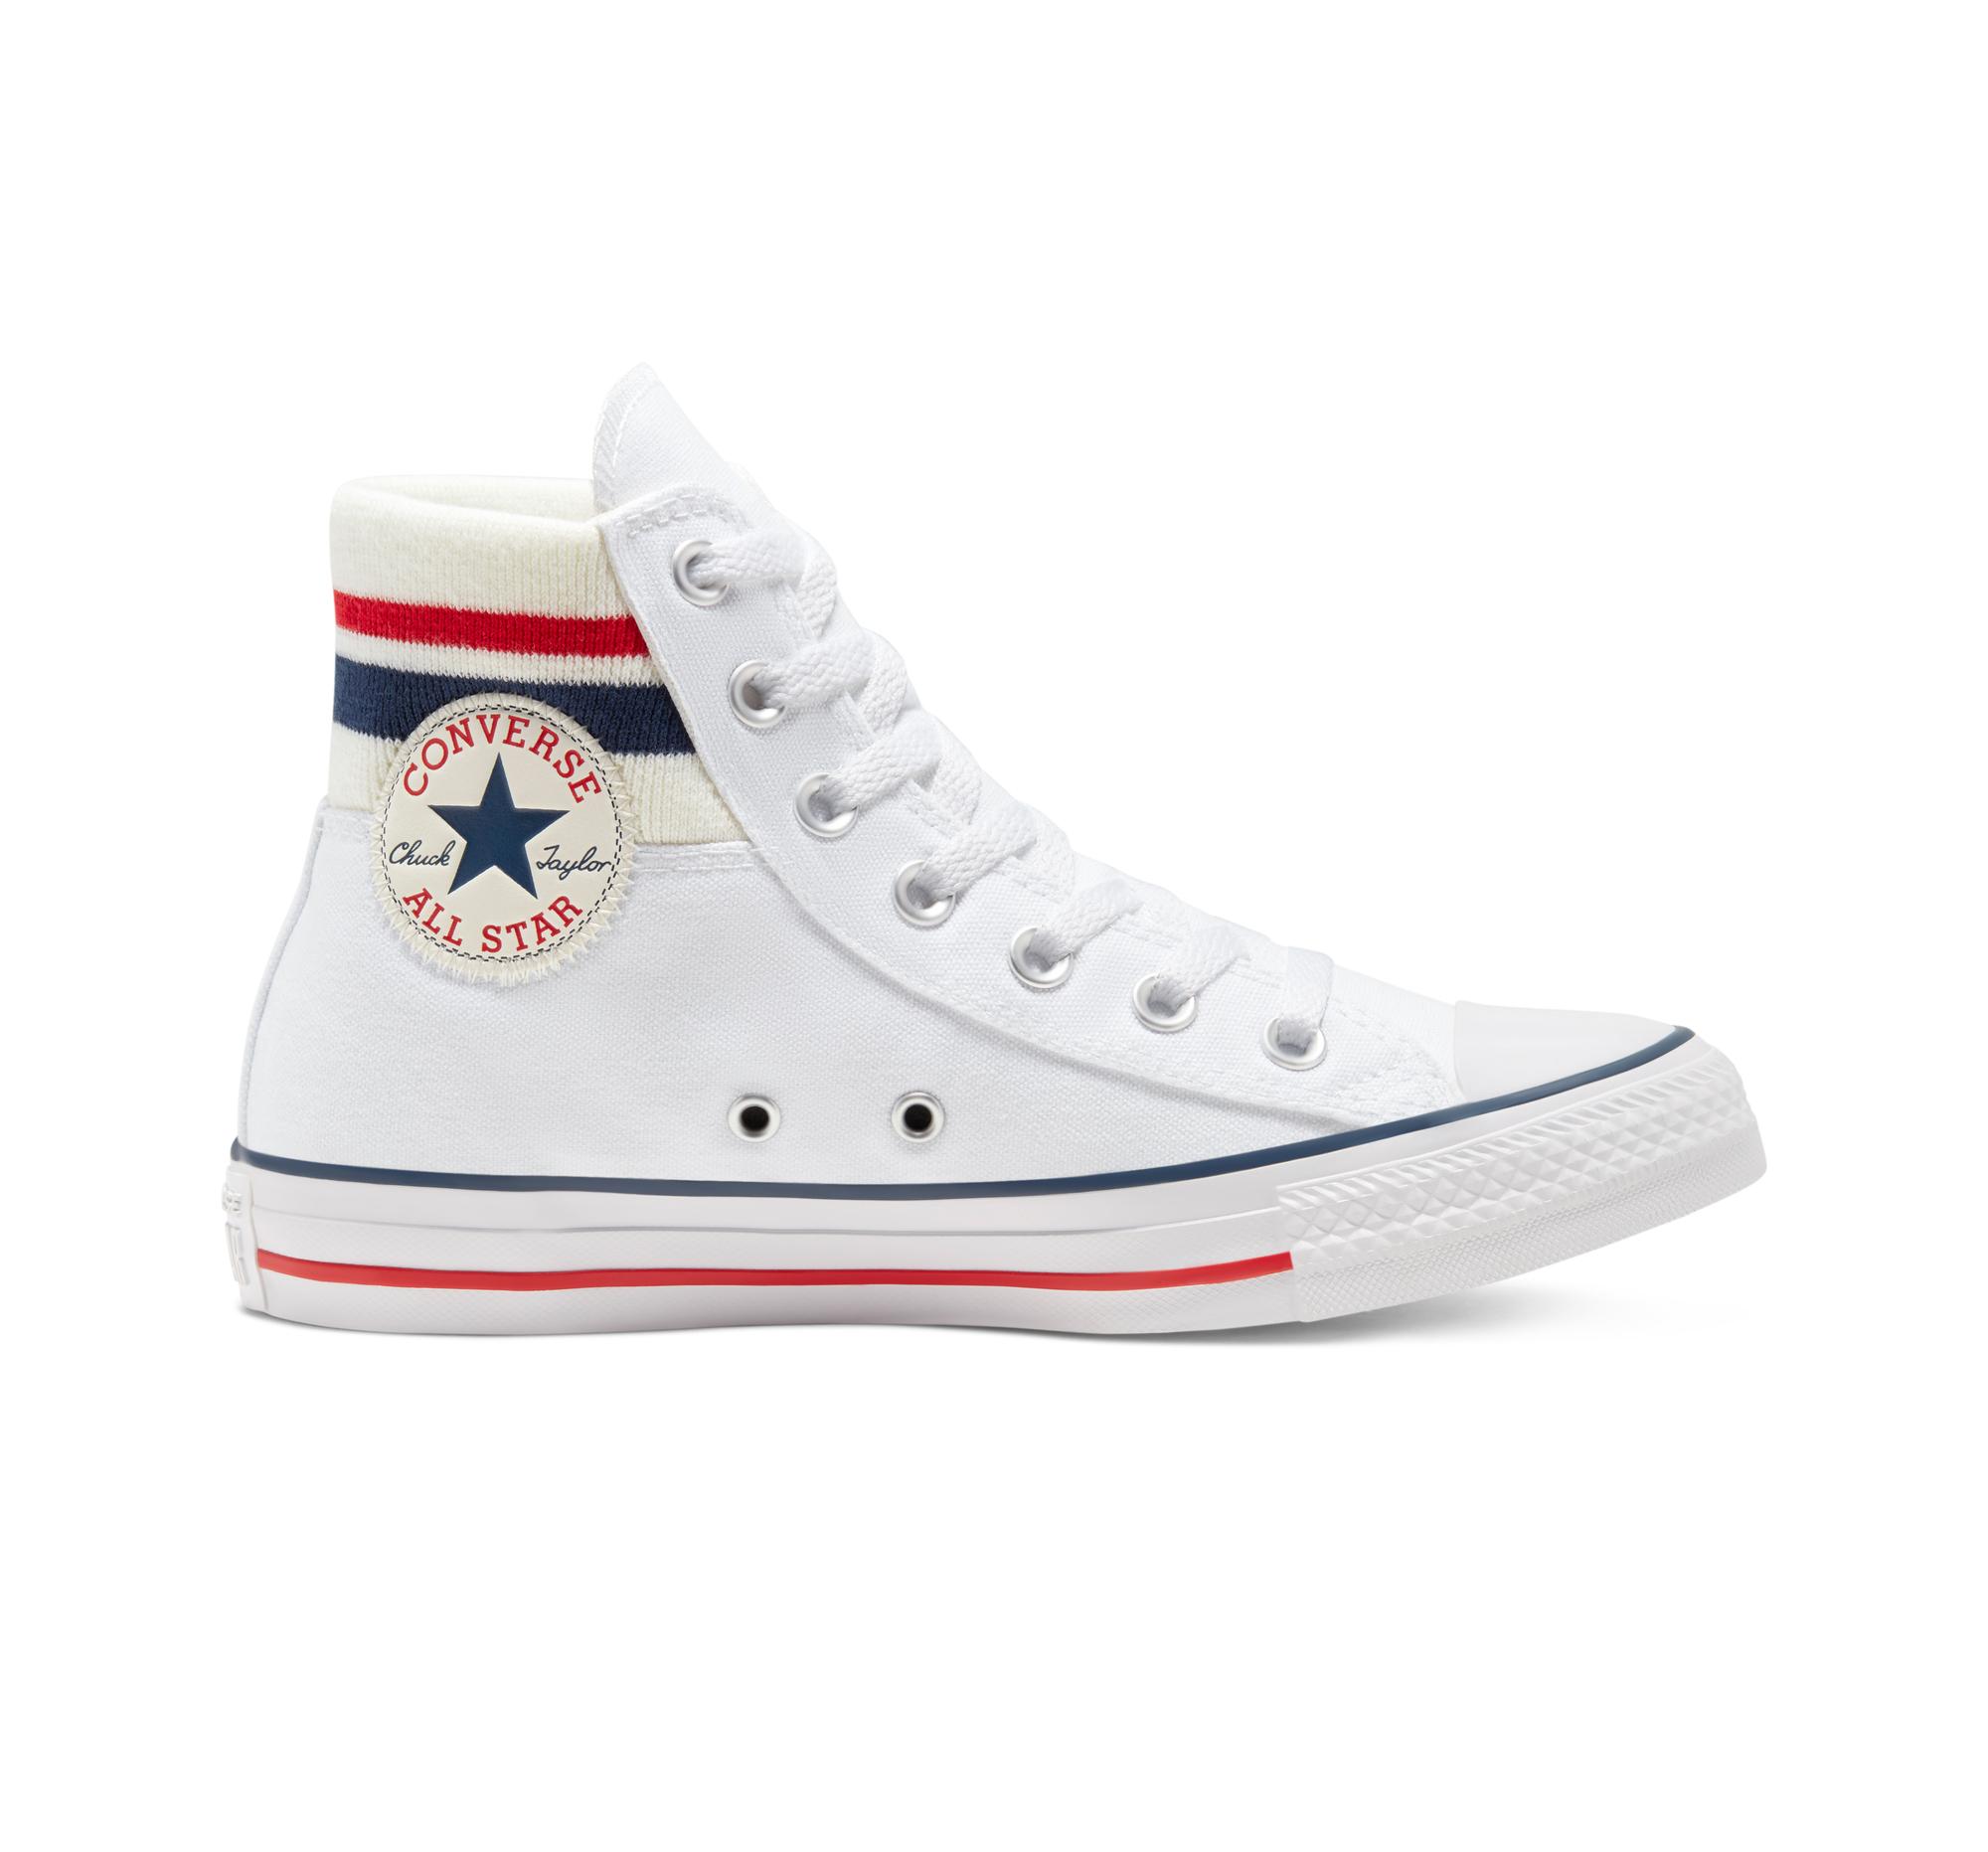 Piglet aspect eyebrow Converse 70s Meets '80s Chuck Taylor All Star in White | Lyst